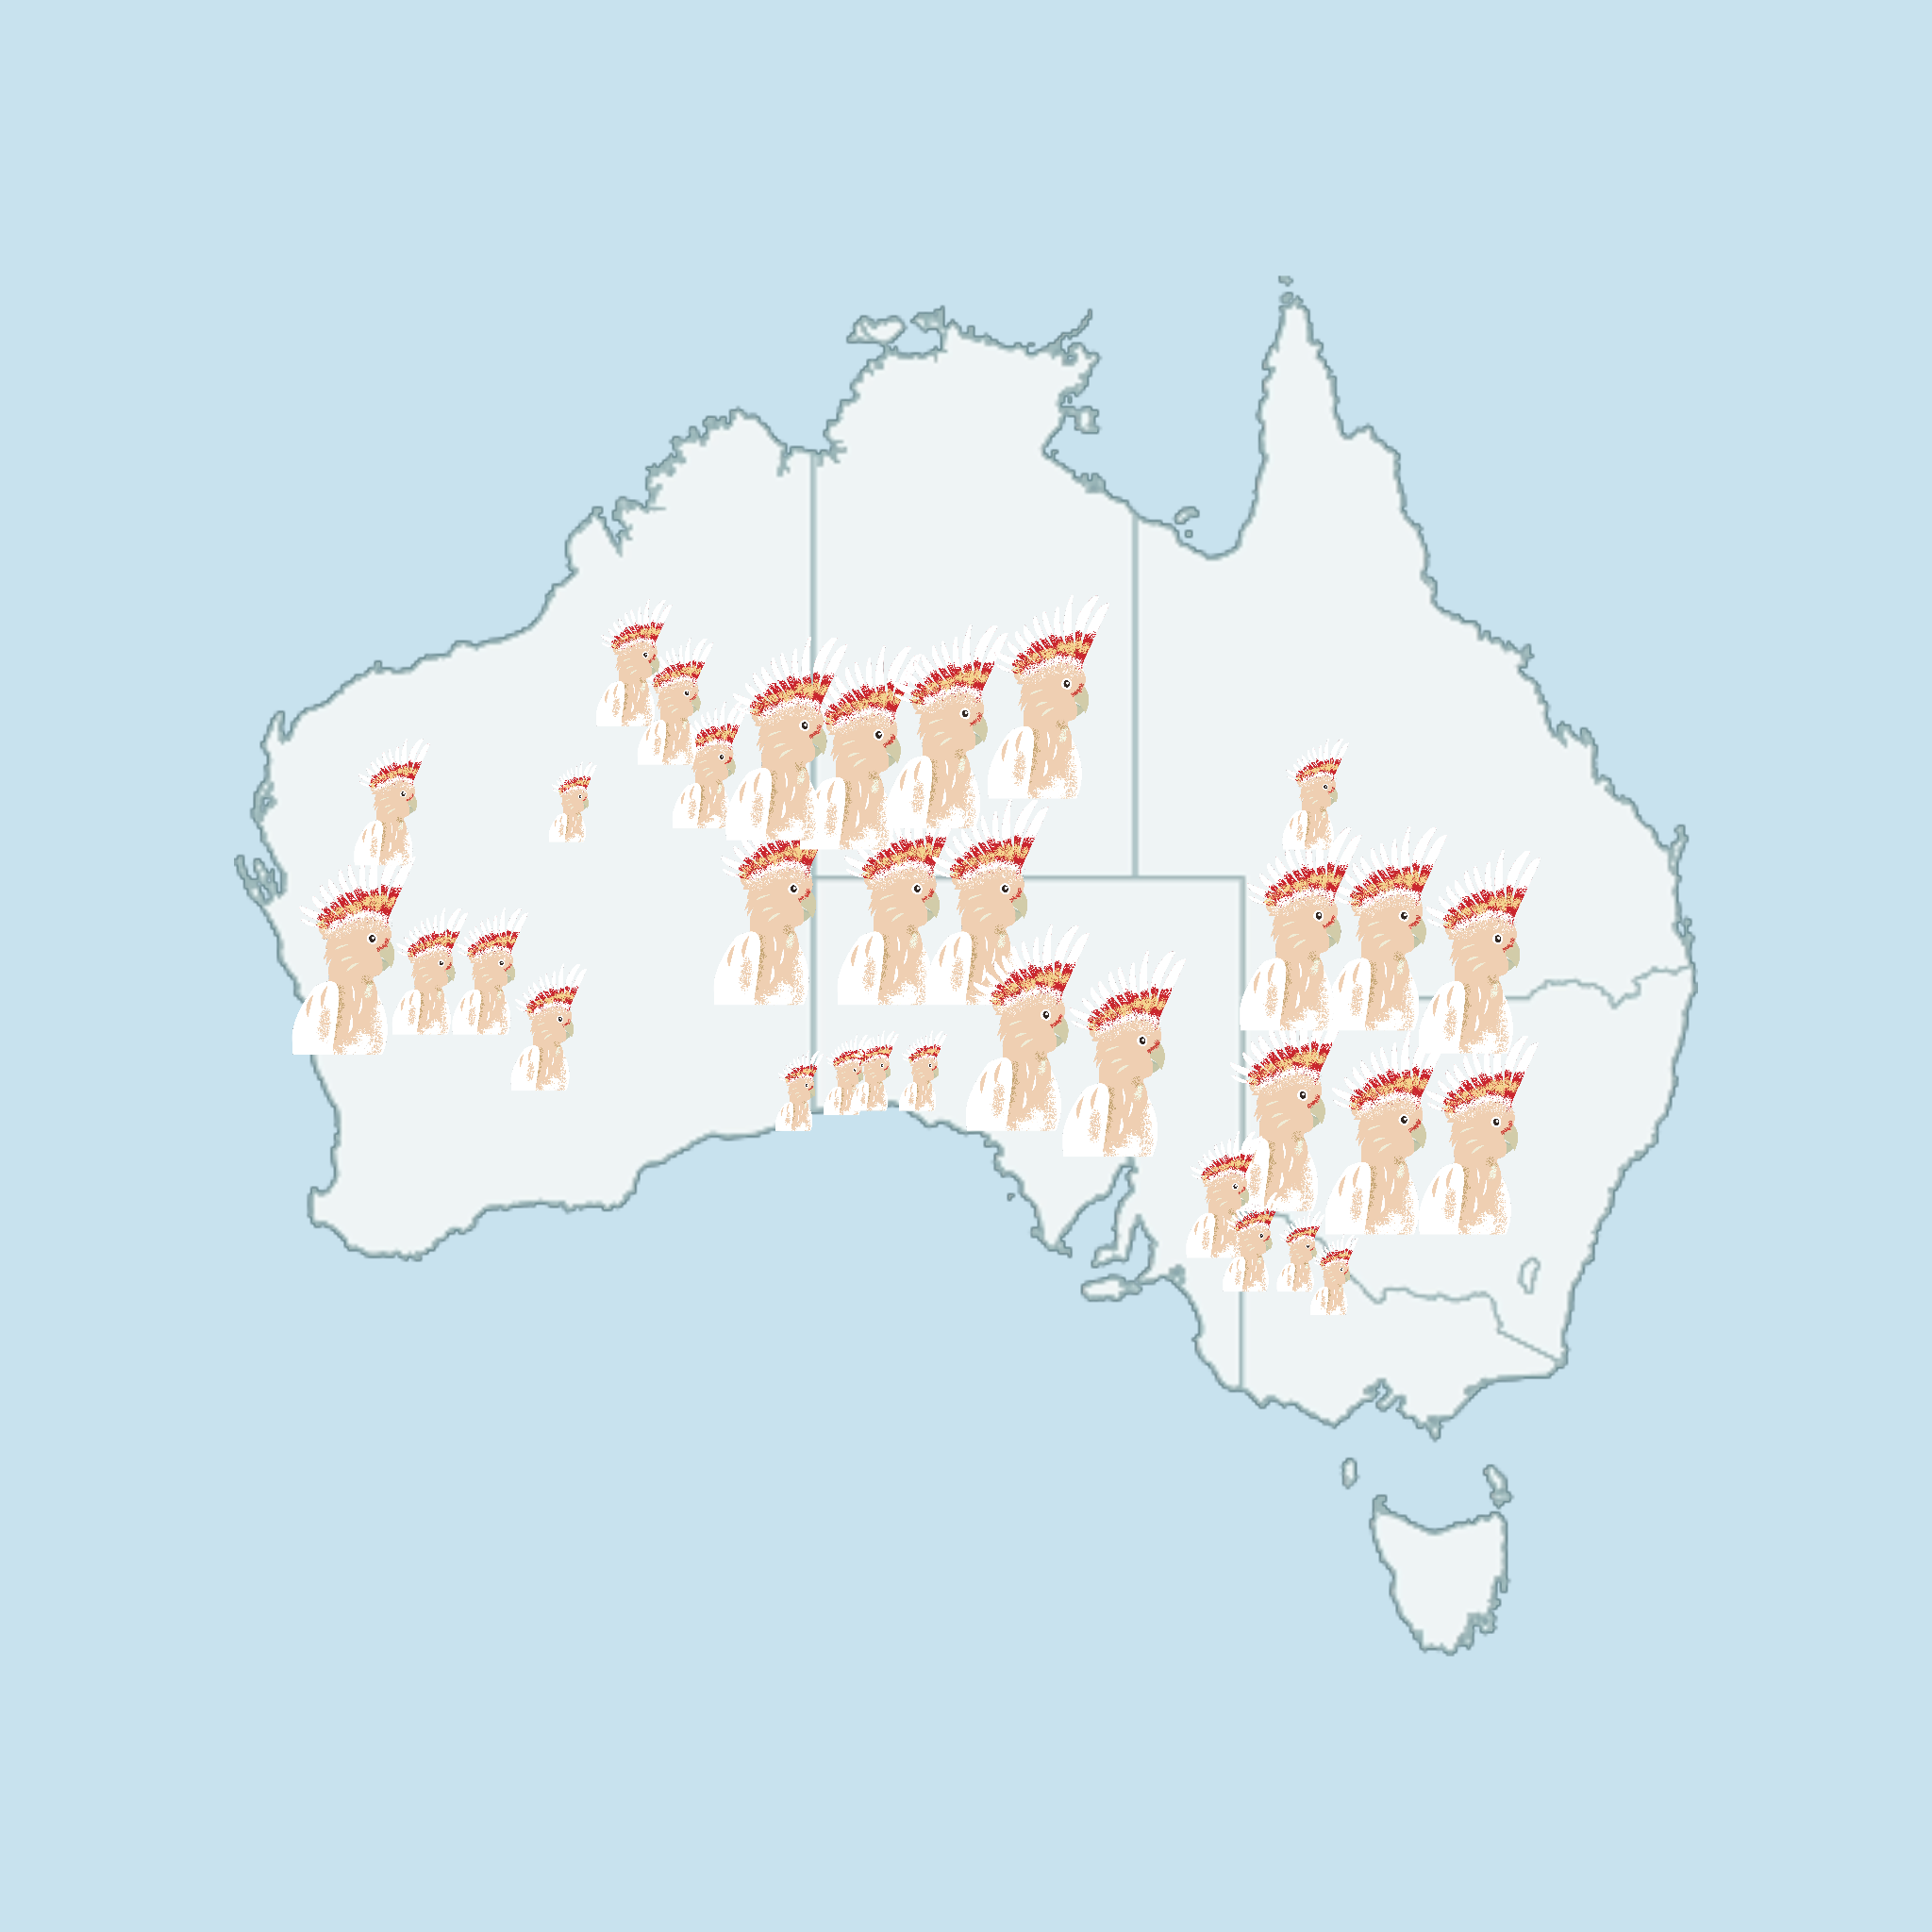 Map of Australia with Major Mitchell's Cockatoos to show where they are located